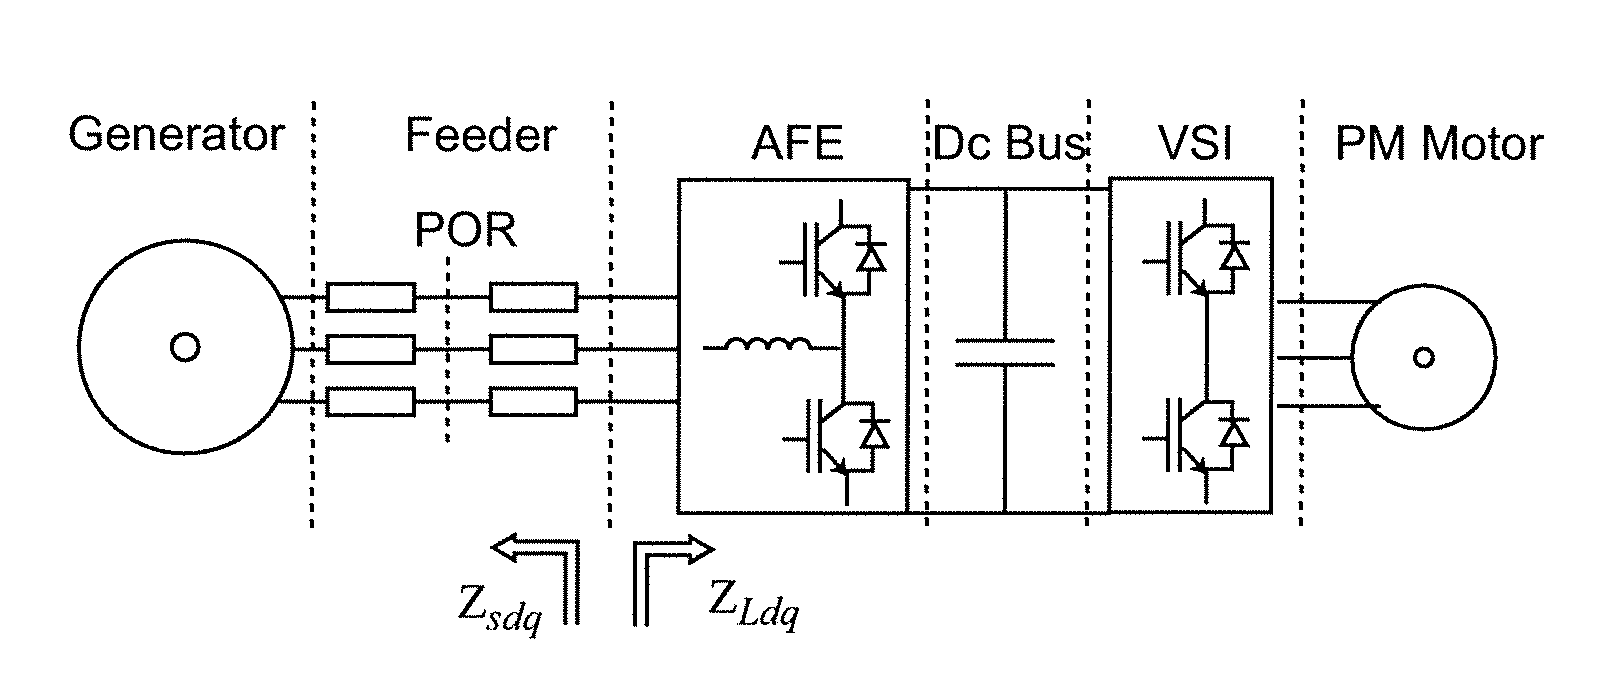 Method of evaluating and ensuring stability of AC/DC power systems